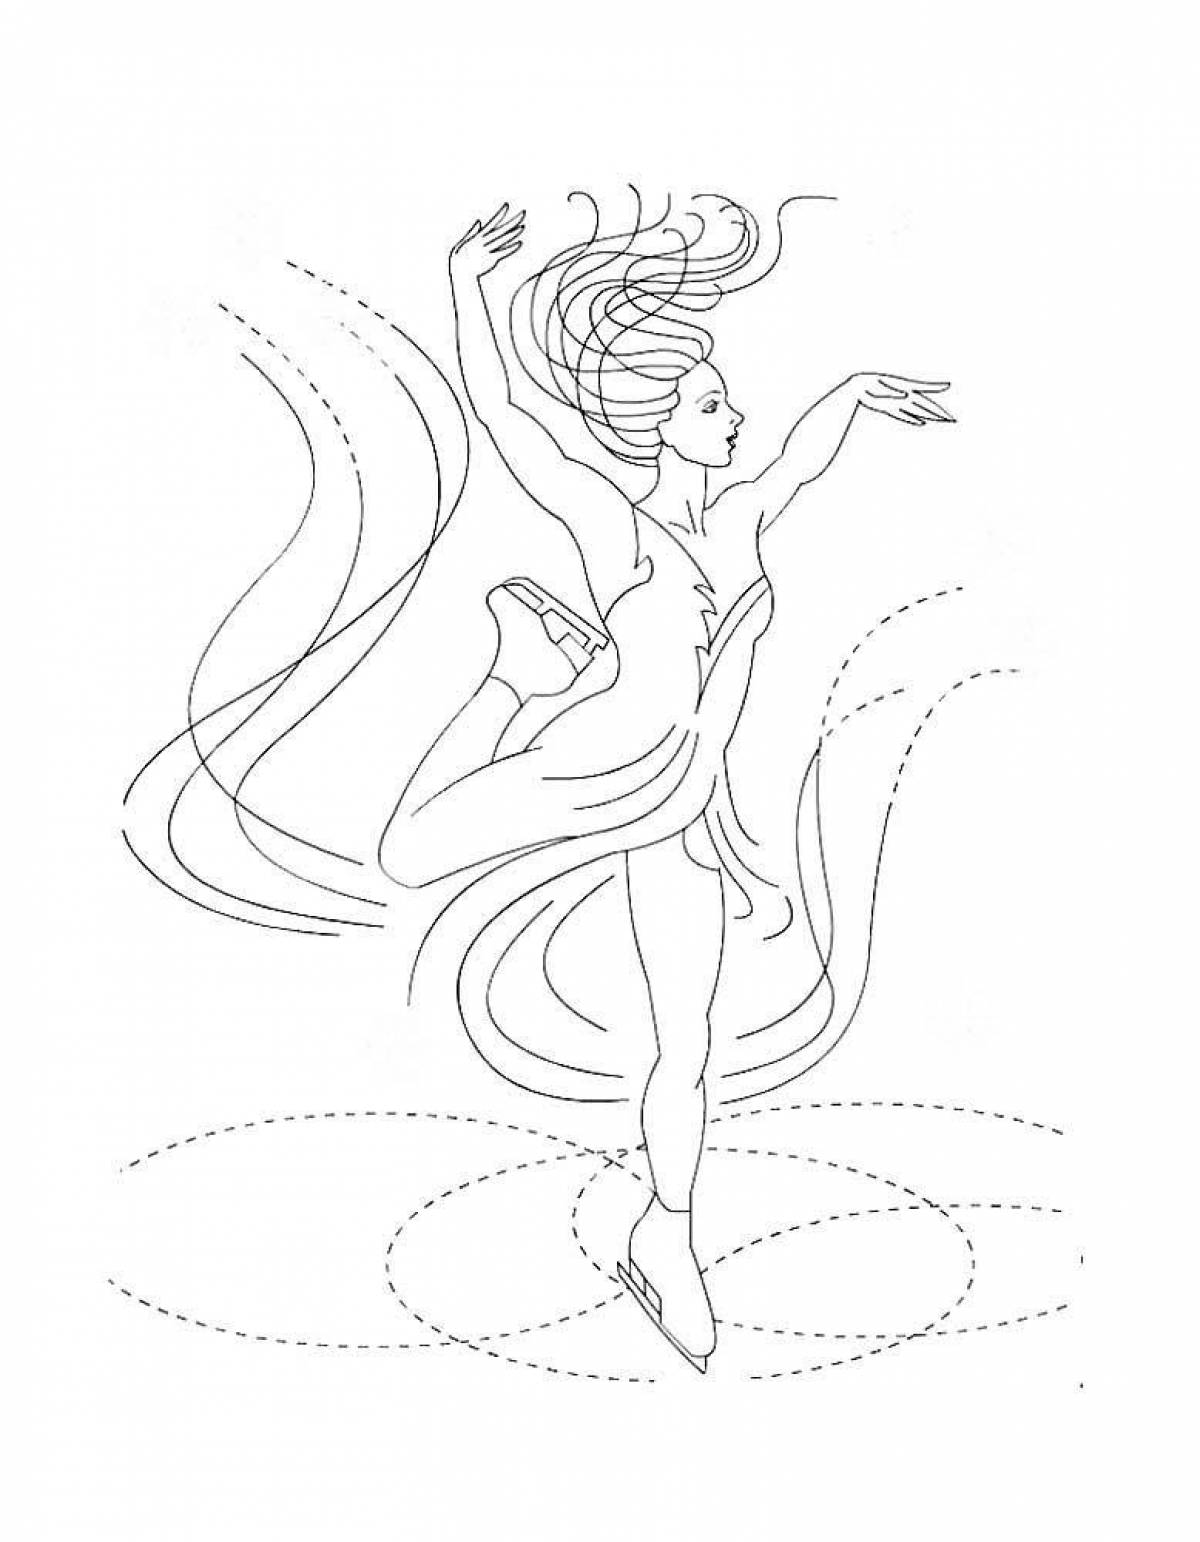 Playful figure skating coloring page